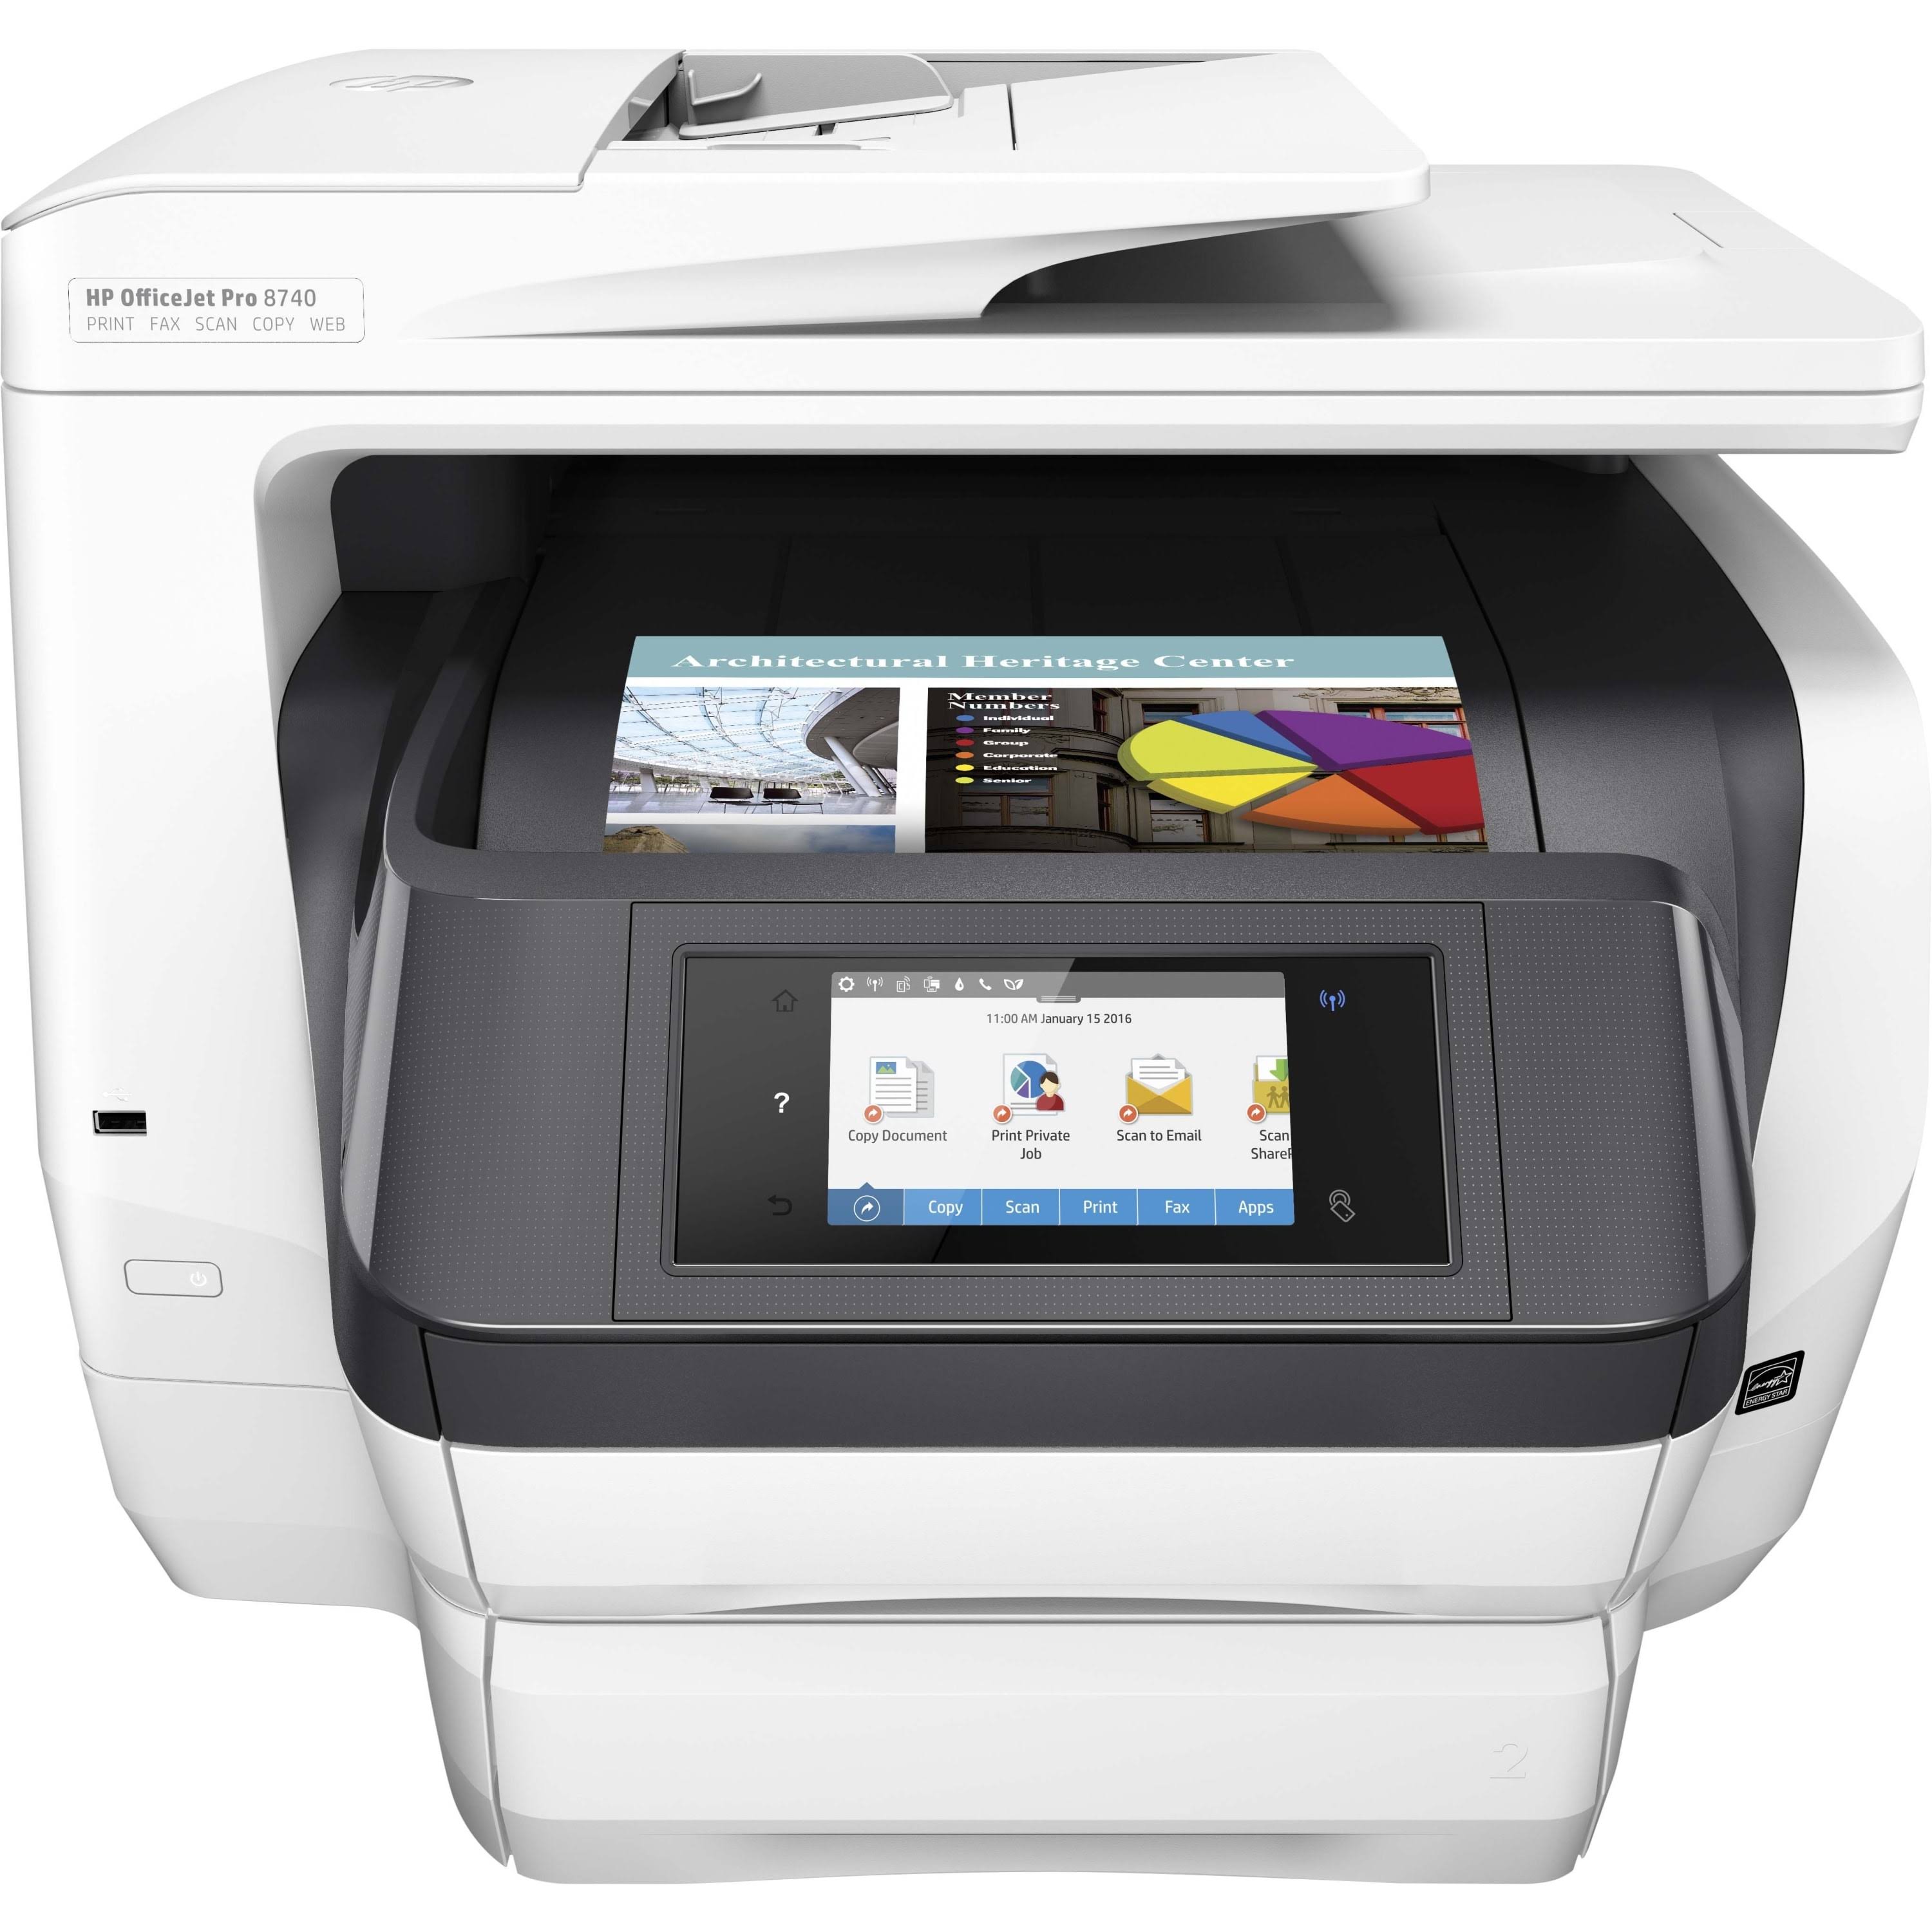 HP OfficeJet Pro 8740 Wireless All-in-One Printer with Mobile Printing, Instant Ink ready (K7S42A)